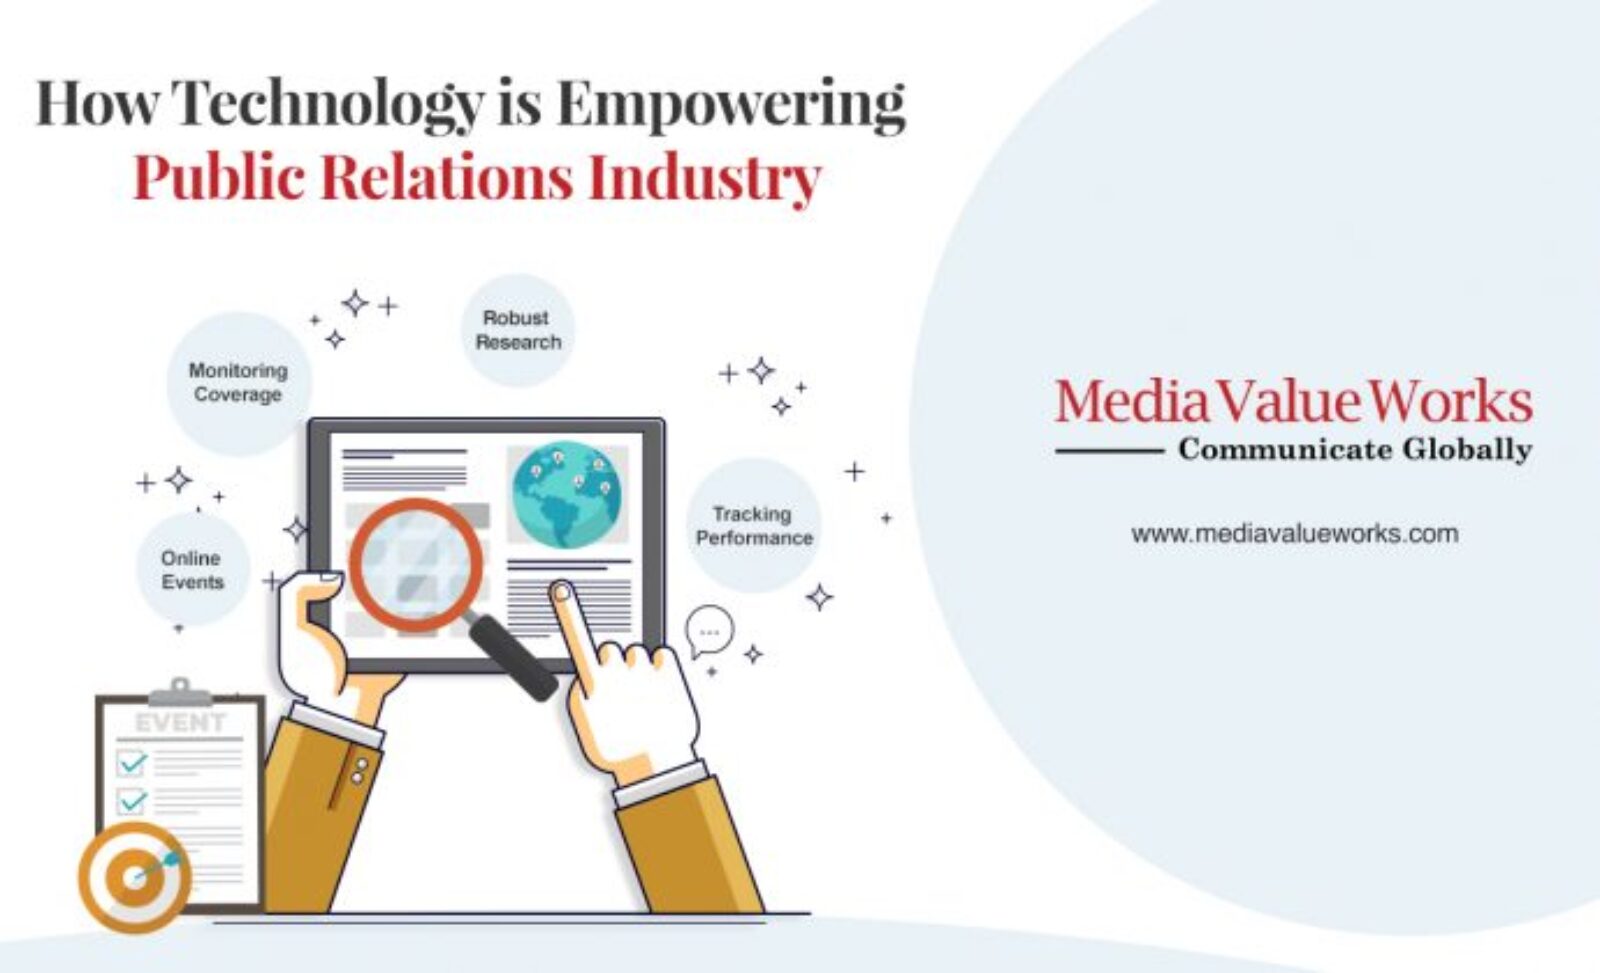 How Technology is Empowering Public Relations Industry